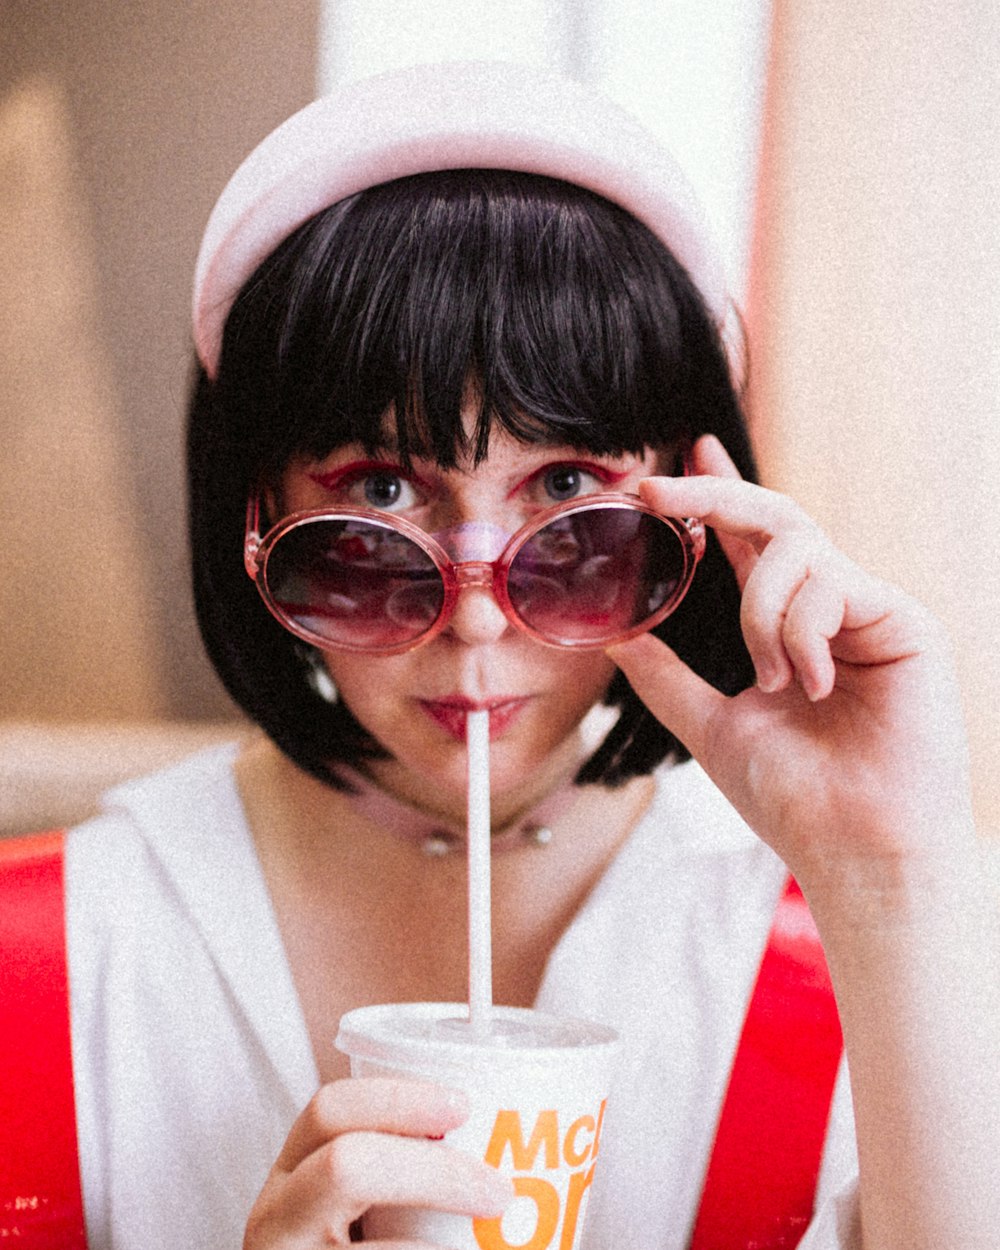 a woman wearing sunglasses and a hat drinking a drink